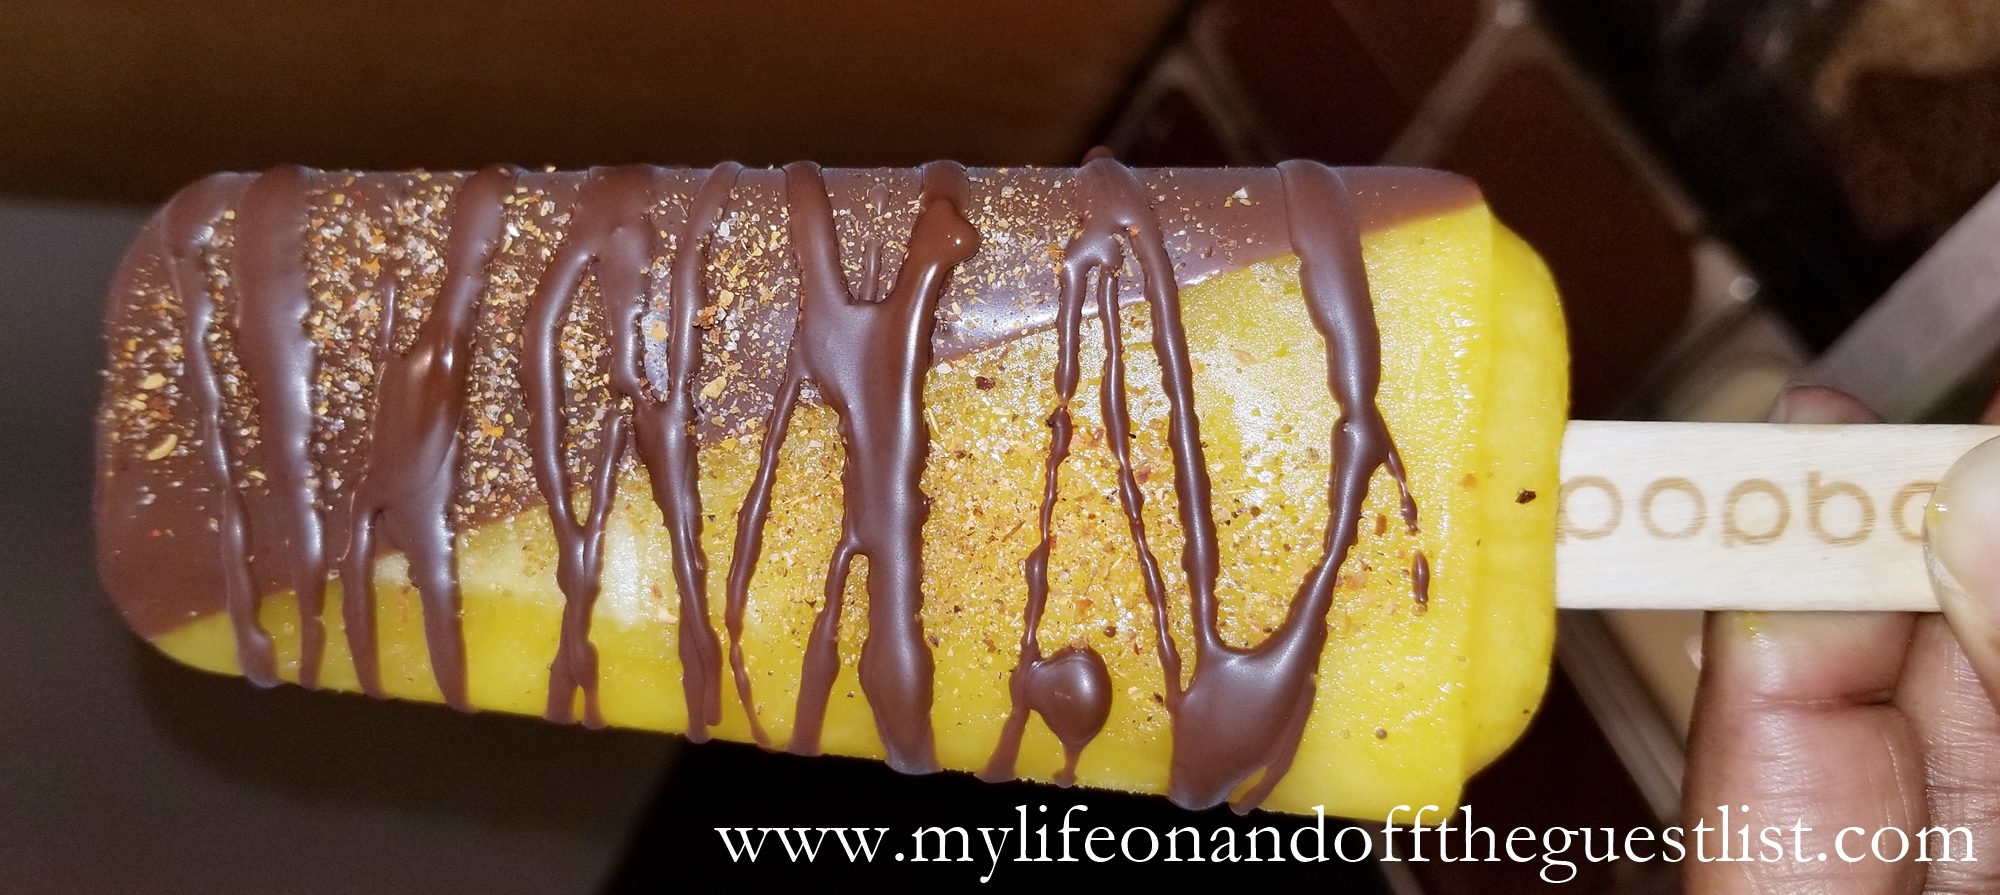 Popbar Passion fruit popSorbetto with Vegan Chocolate